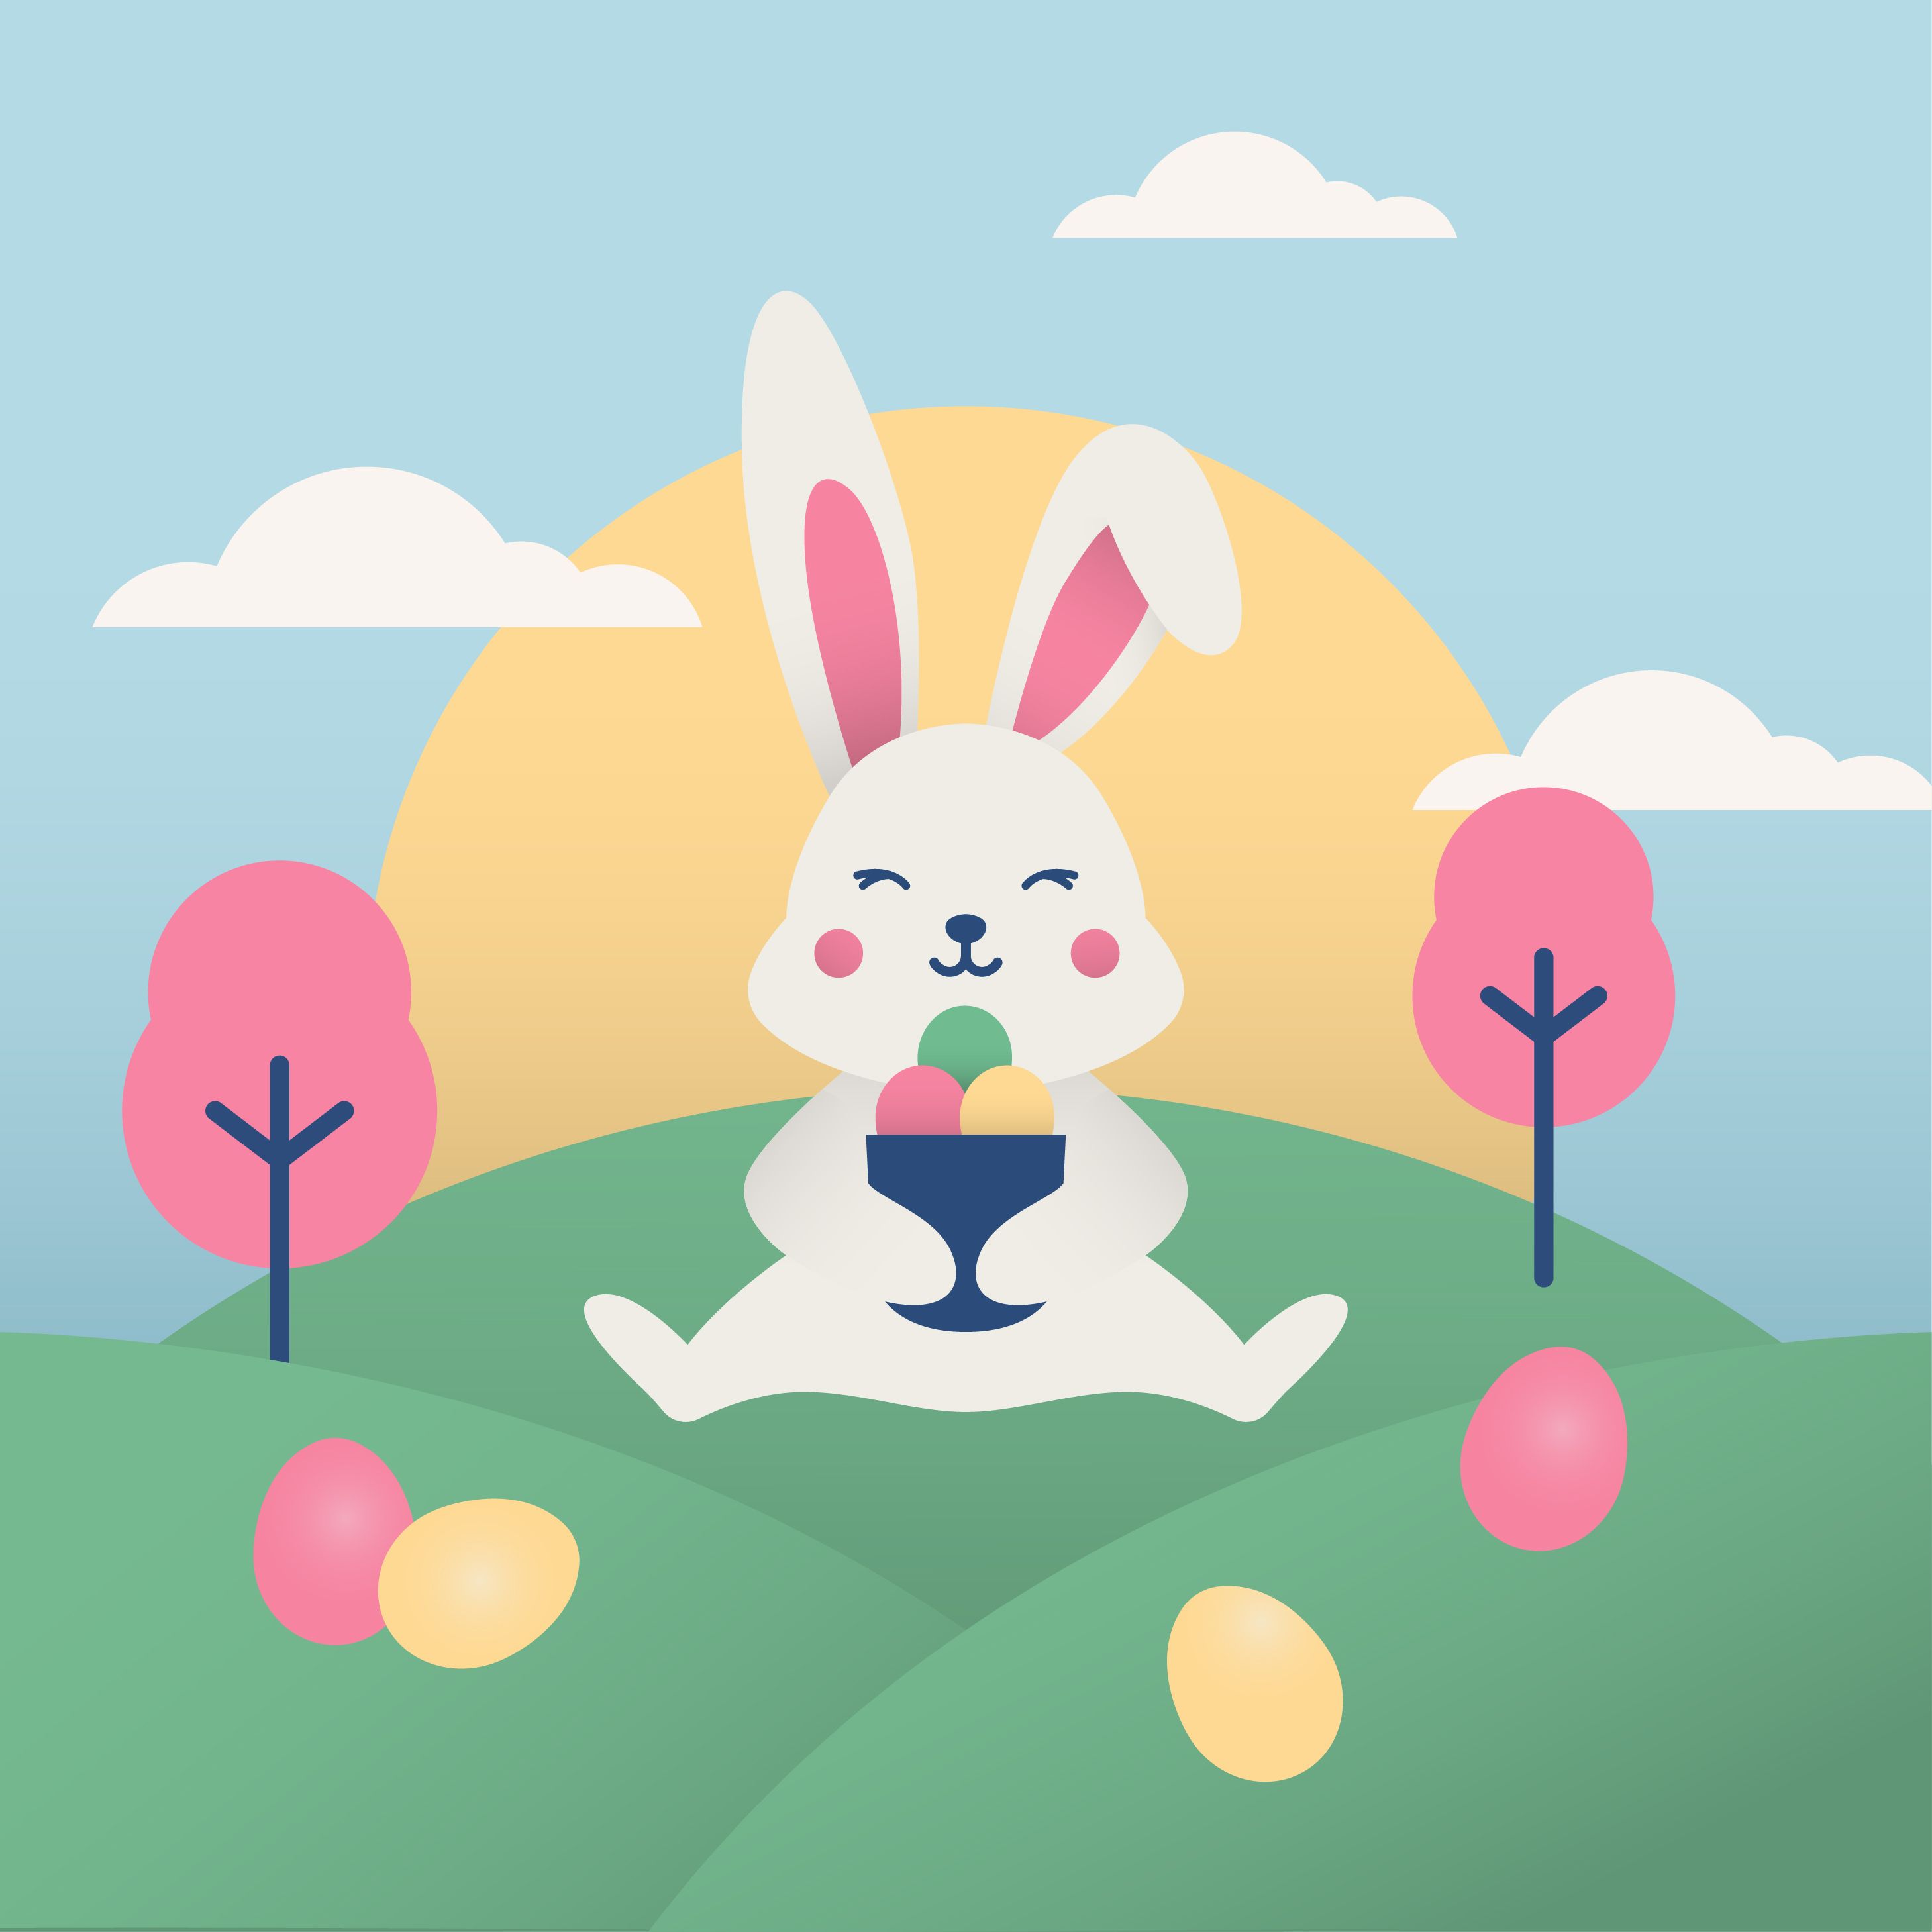 Easter Wallpaper with Cute Rabbit Free Vectors, Clipart